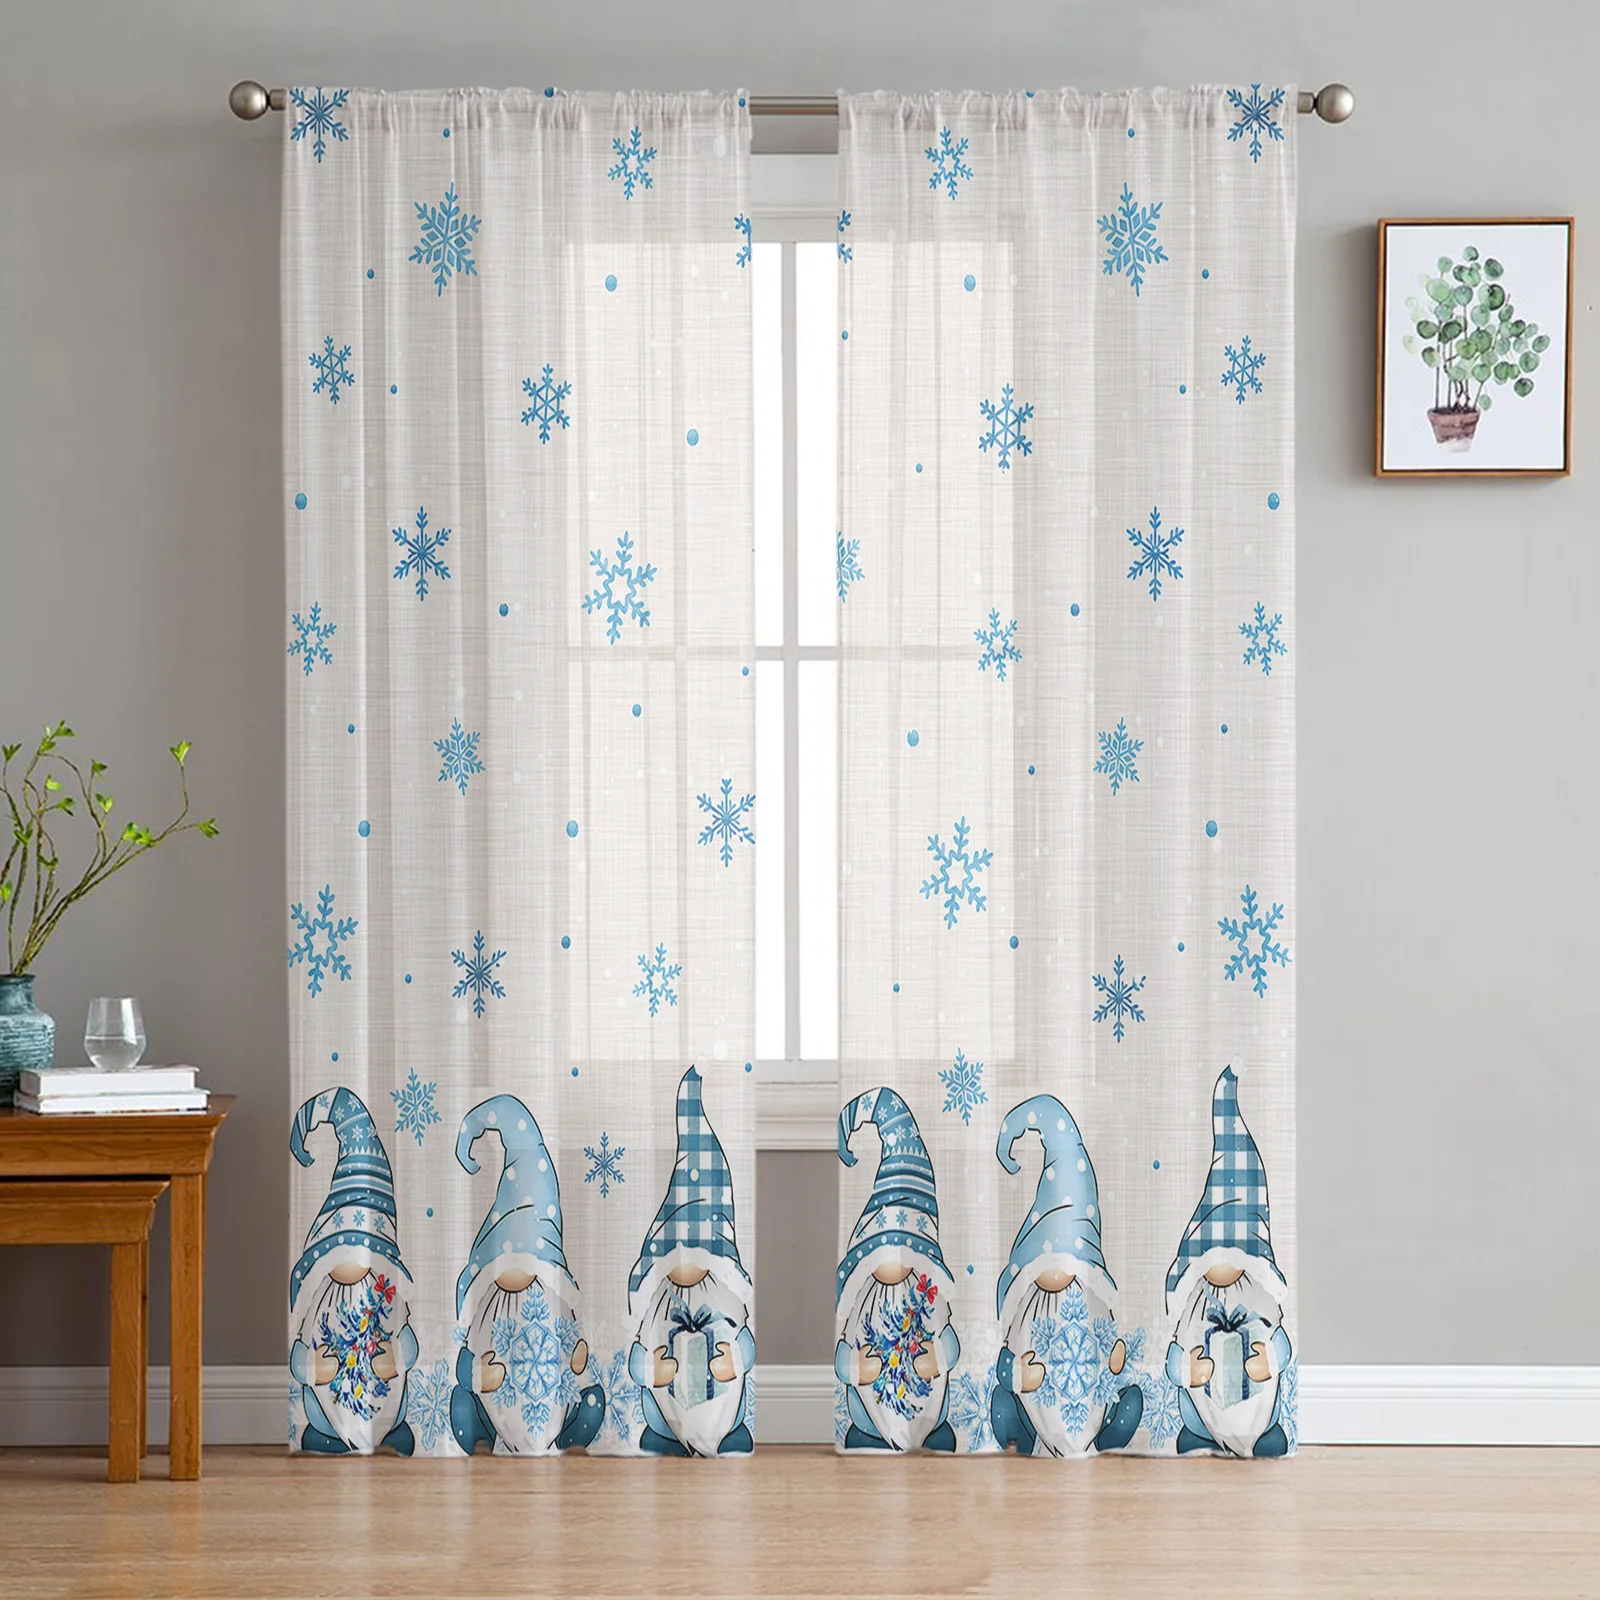 

Christmas Blue Snowflake Gnome Window Tulle Curtains for Living Room Kitchen Christmas Home Decor Sheer Voile Curtains